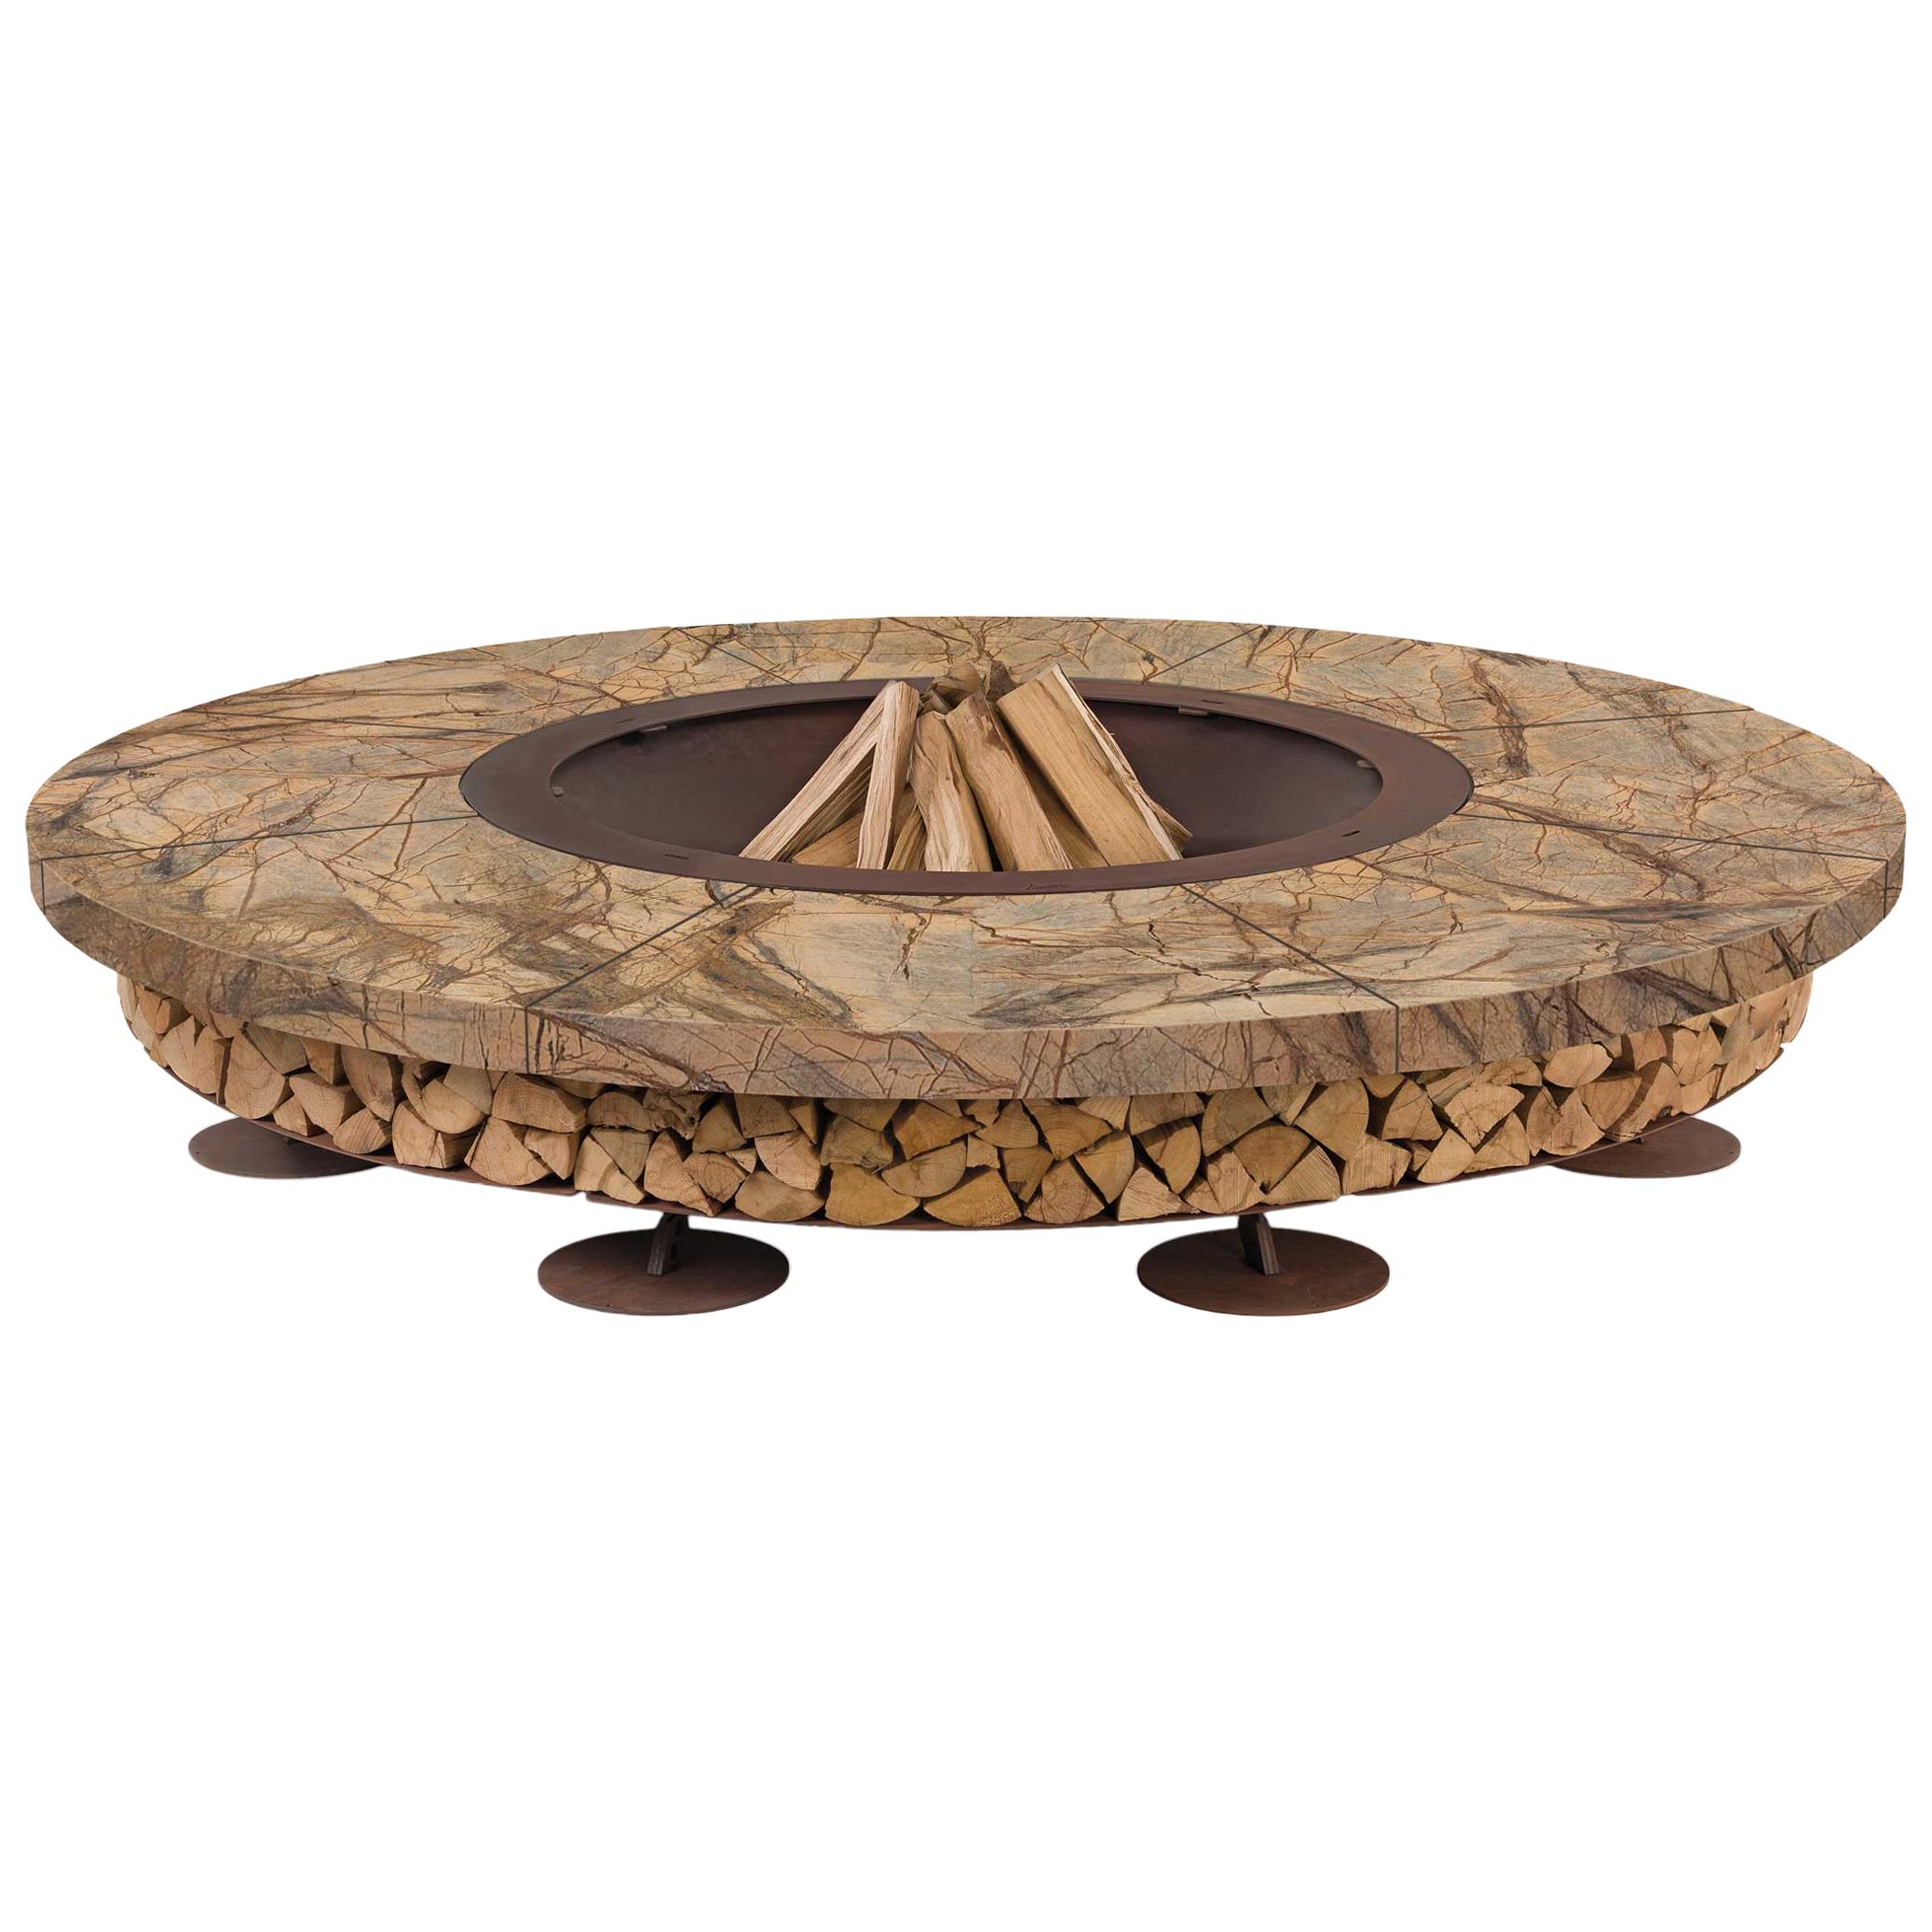 Ercole Large Rain Forest Brown Marble Fire Pit by AK47 Design